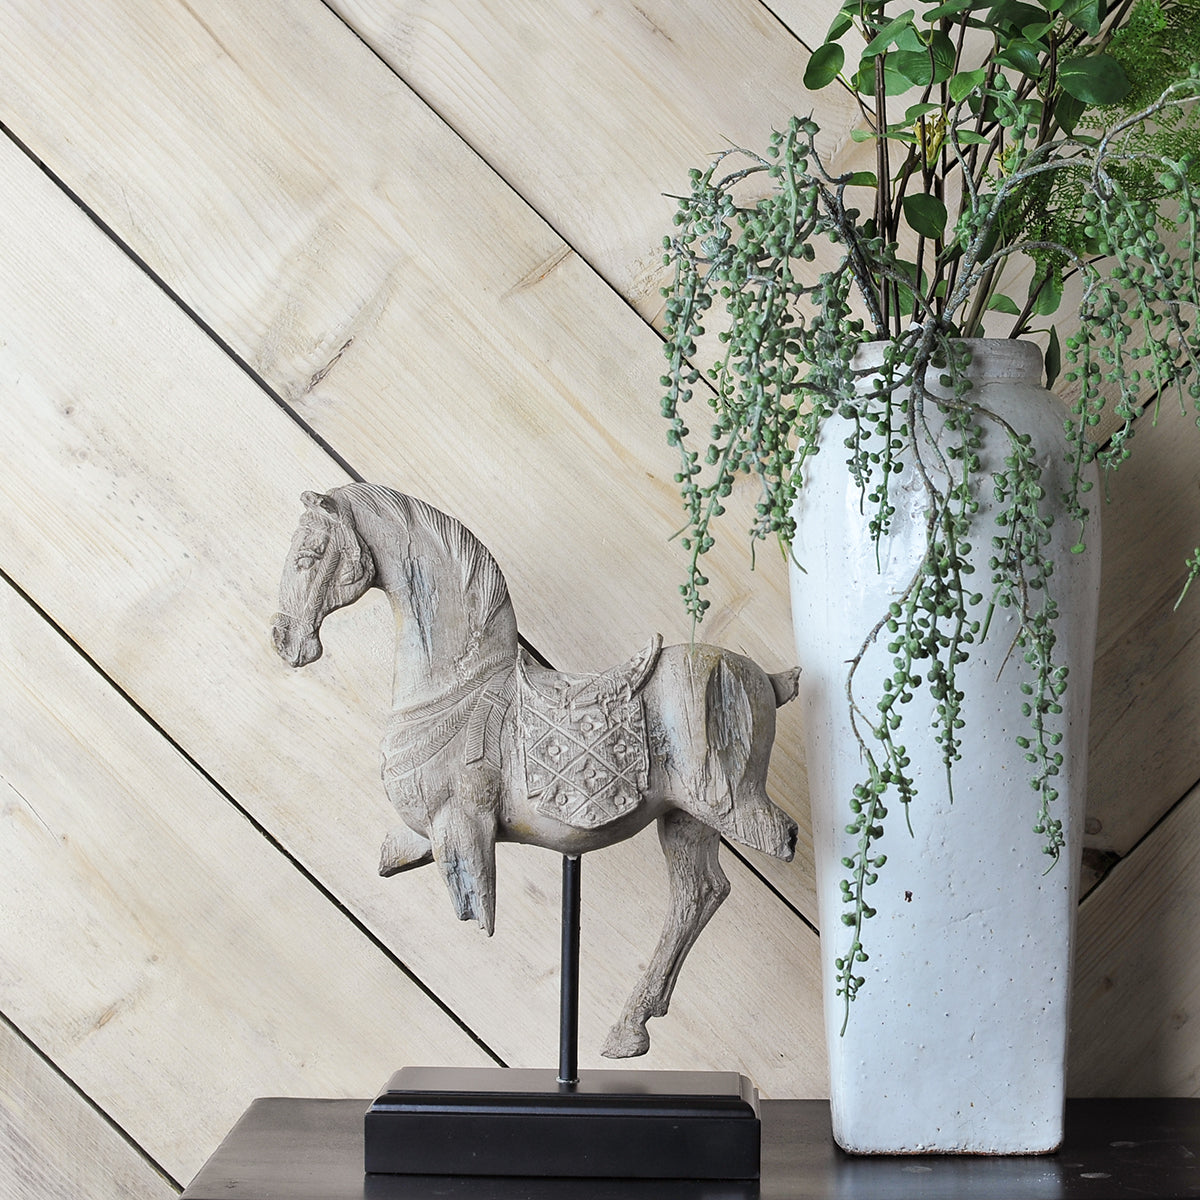 white horse on a stand